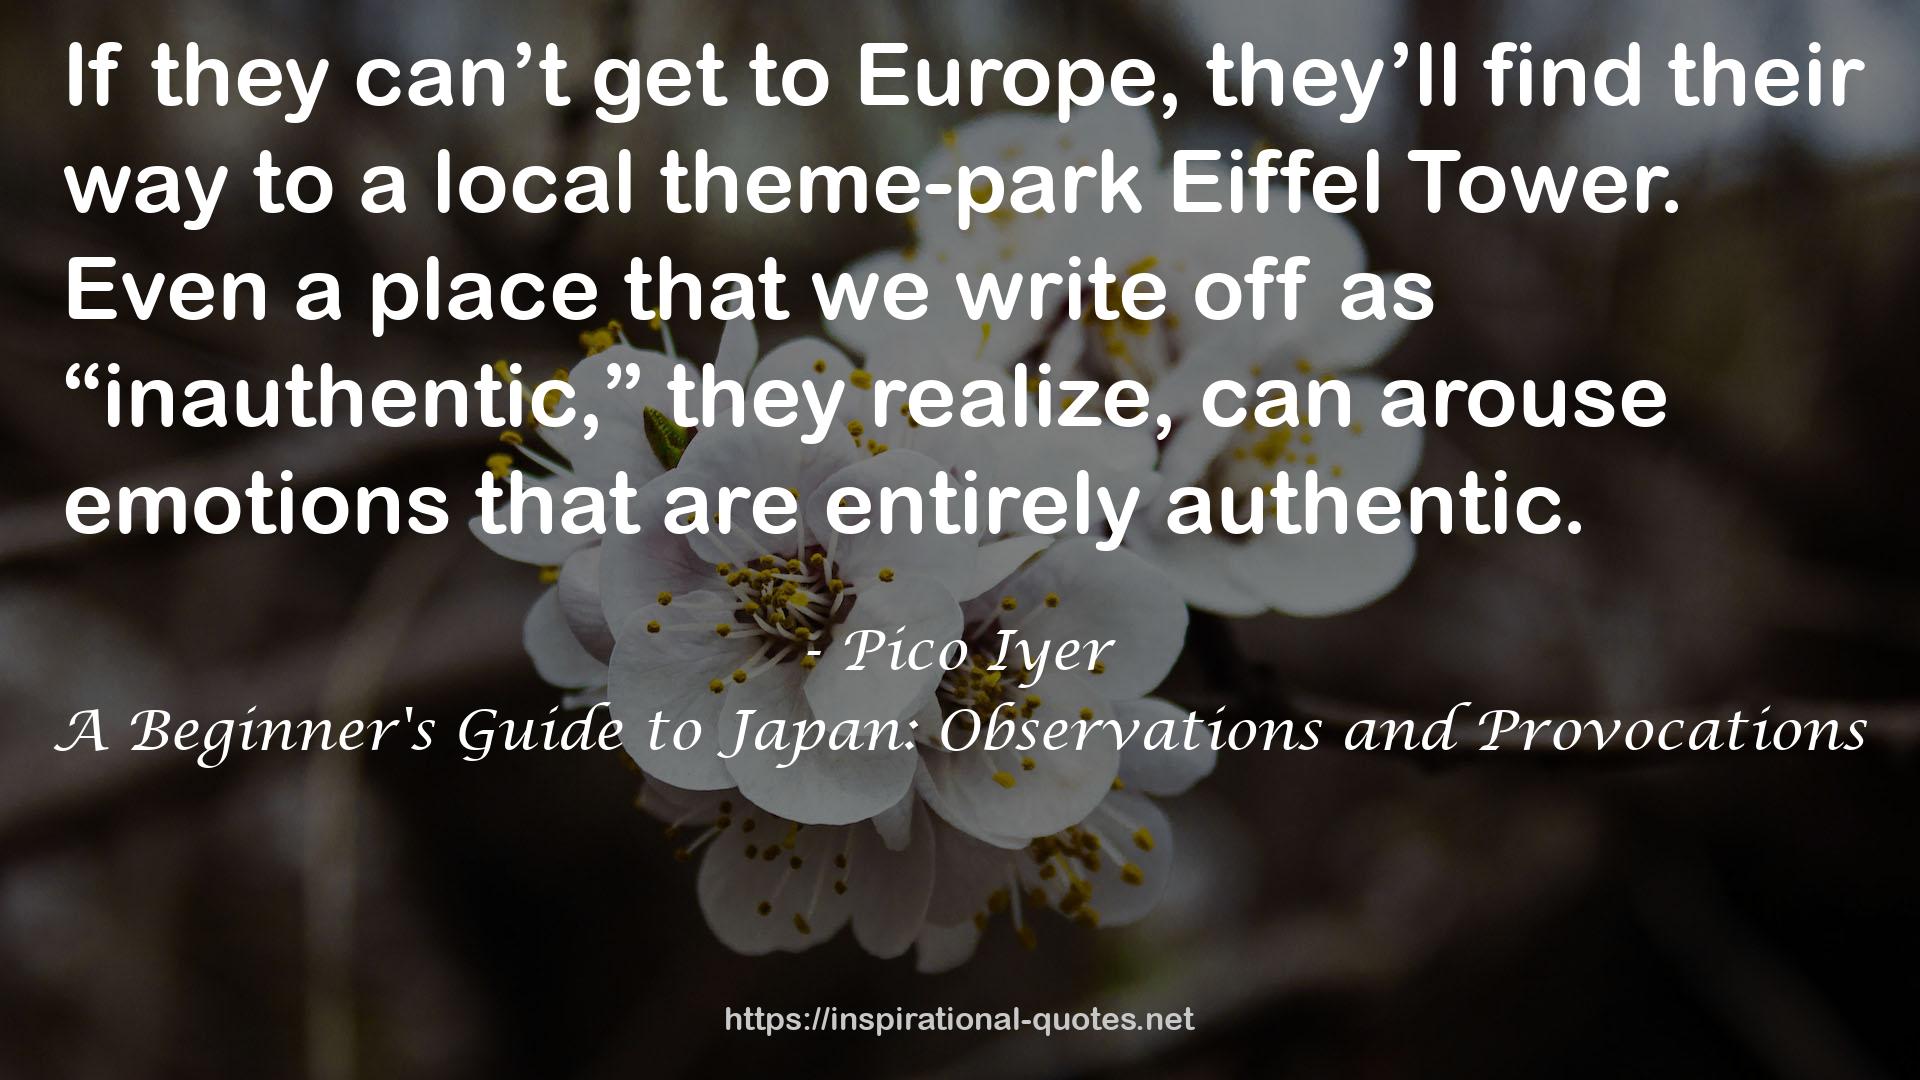 A Beginner's Guide to Japan: Observations and Provocations QUOTES